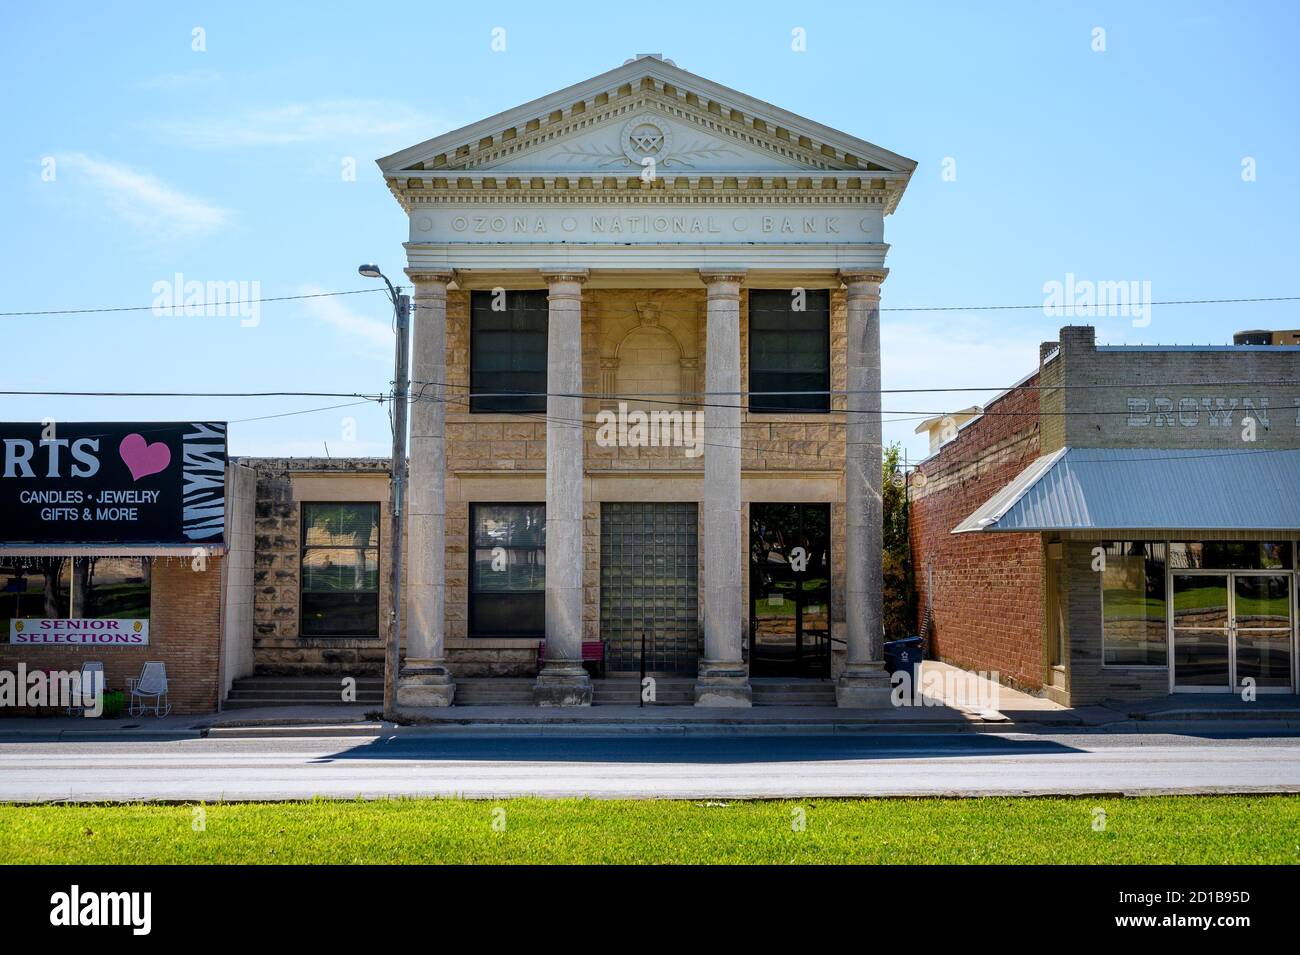 Ozona, Texas - August  6, 2020: The Ozona National Bank building in Ozona, Texas, built in 1905 and designated a Recorded Texas Historic Landmark in 1 Stock Photo